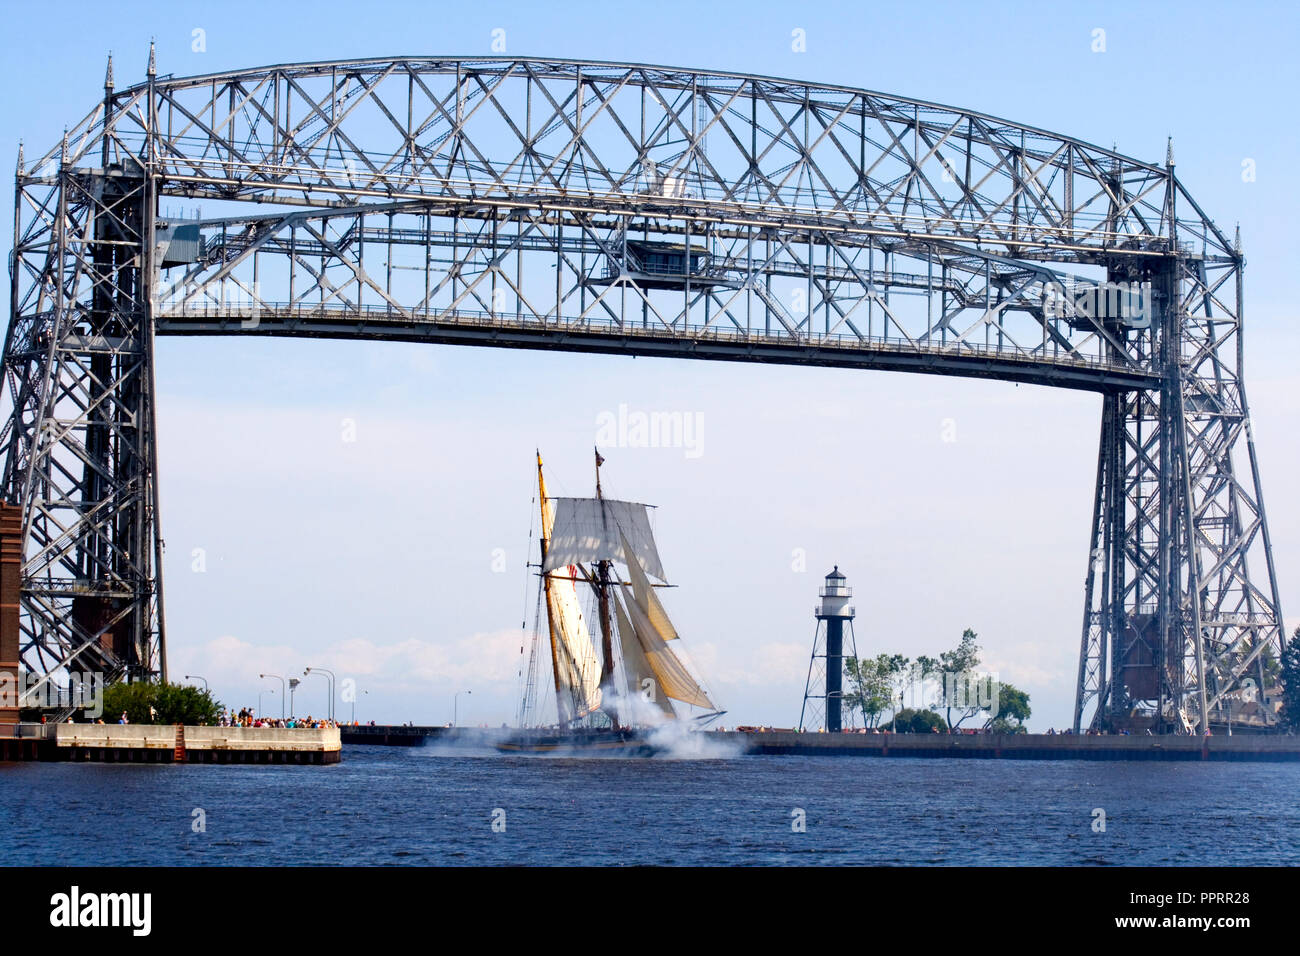 Pride of Baltimore II Tall Ship sailing under the Aerial Lift Bridge in the Duluth Port of Lake Superior Canal Park. Duluth Minnesota MN USA Stock Photo